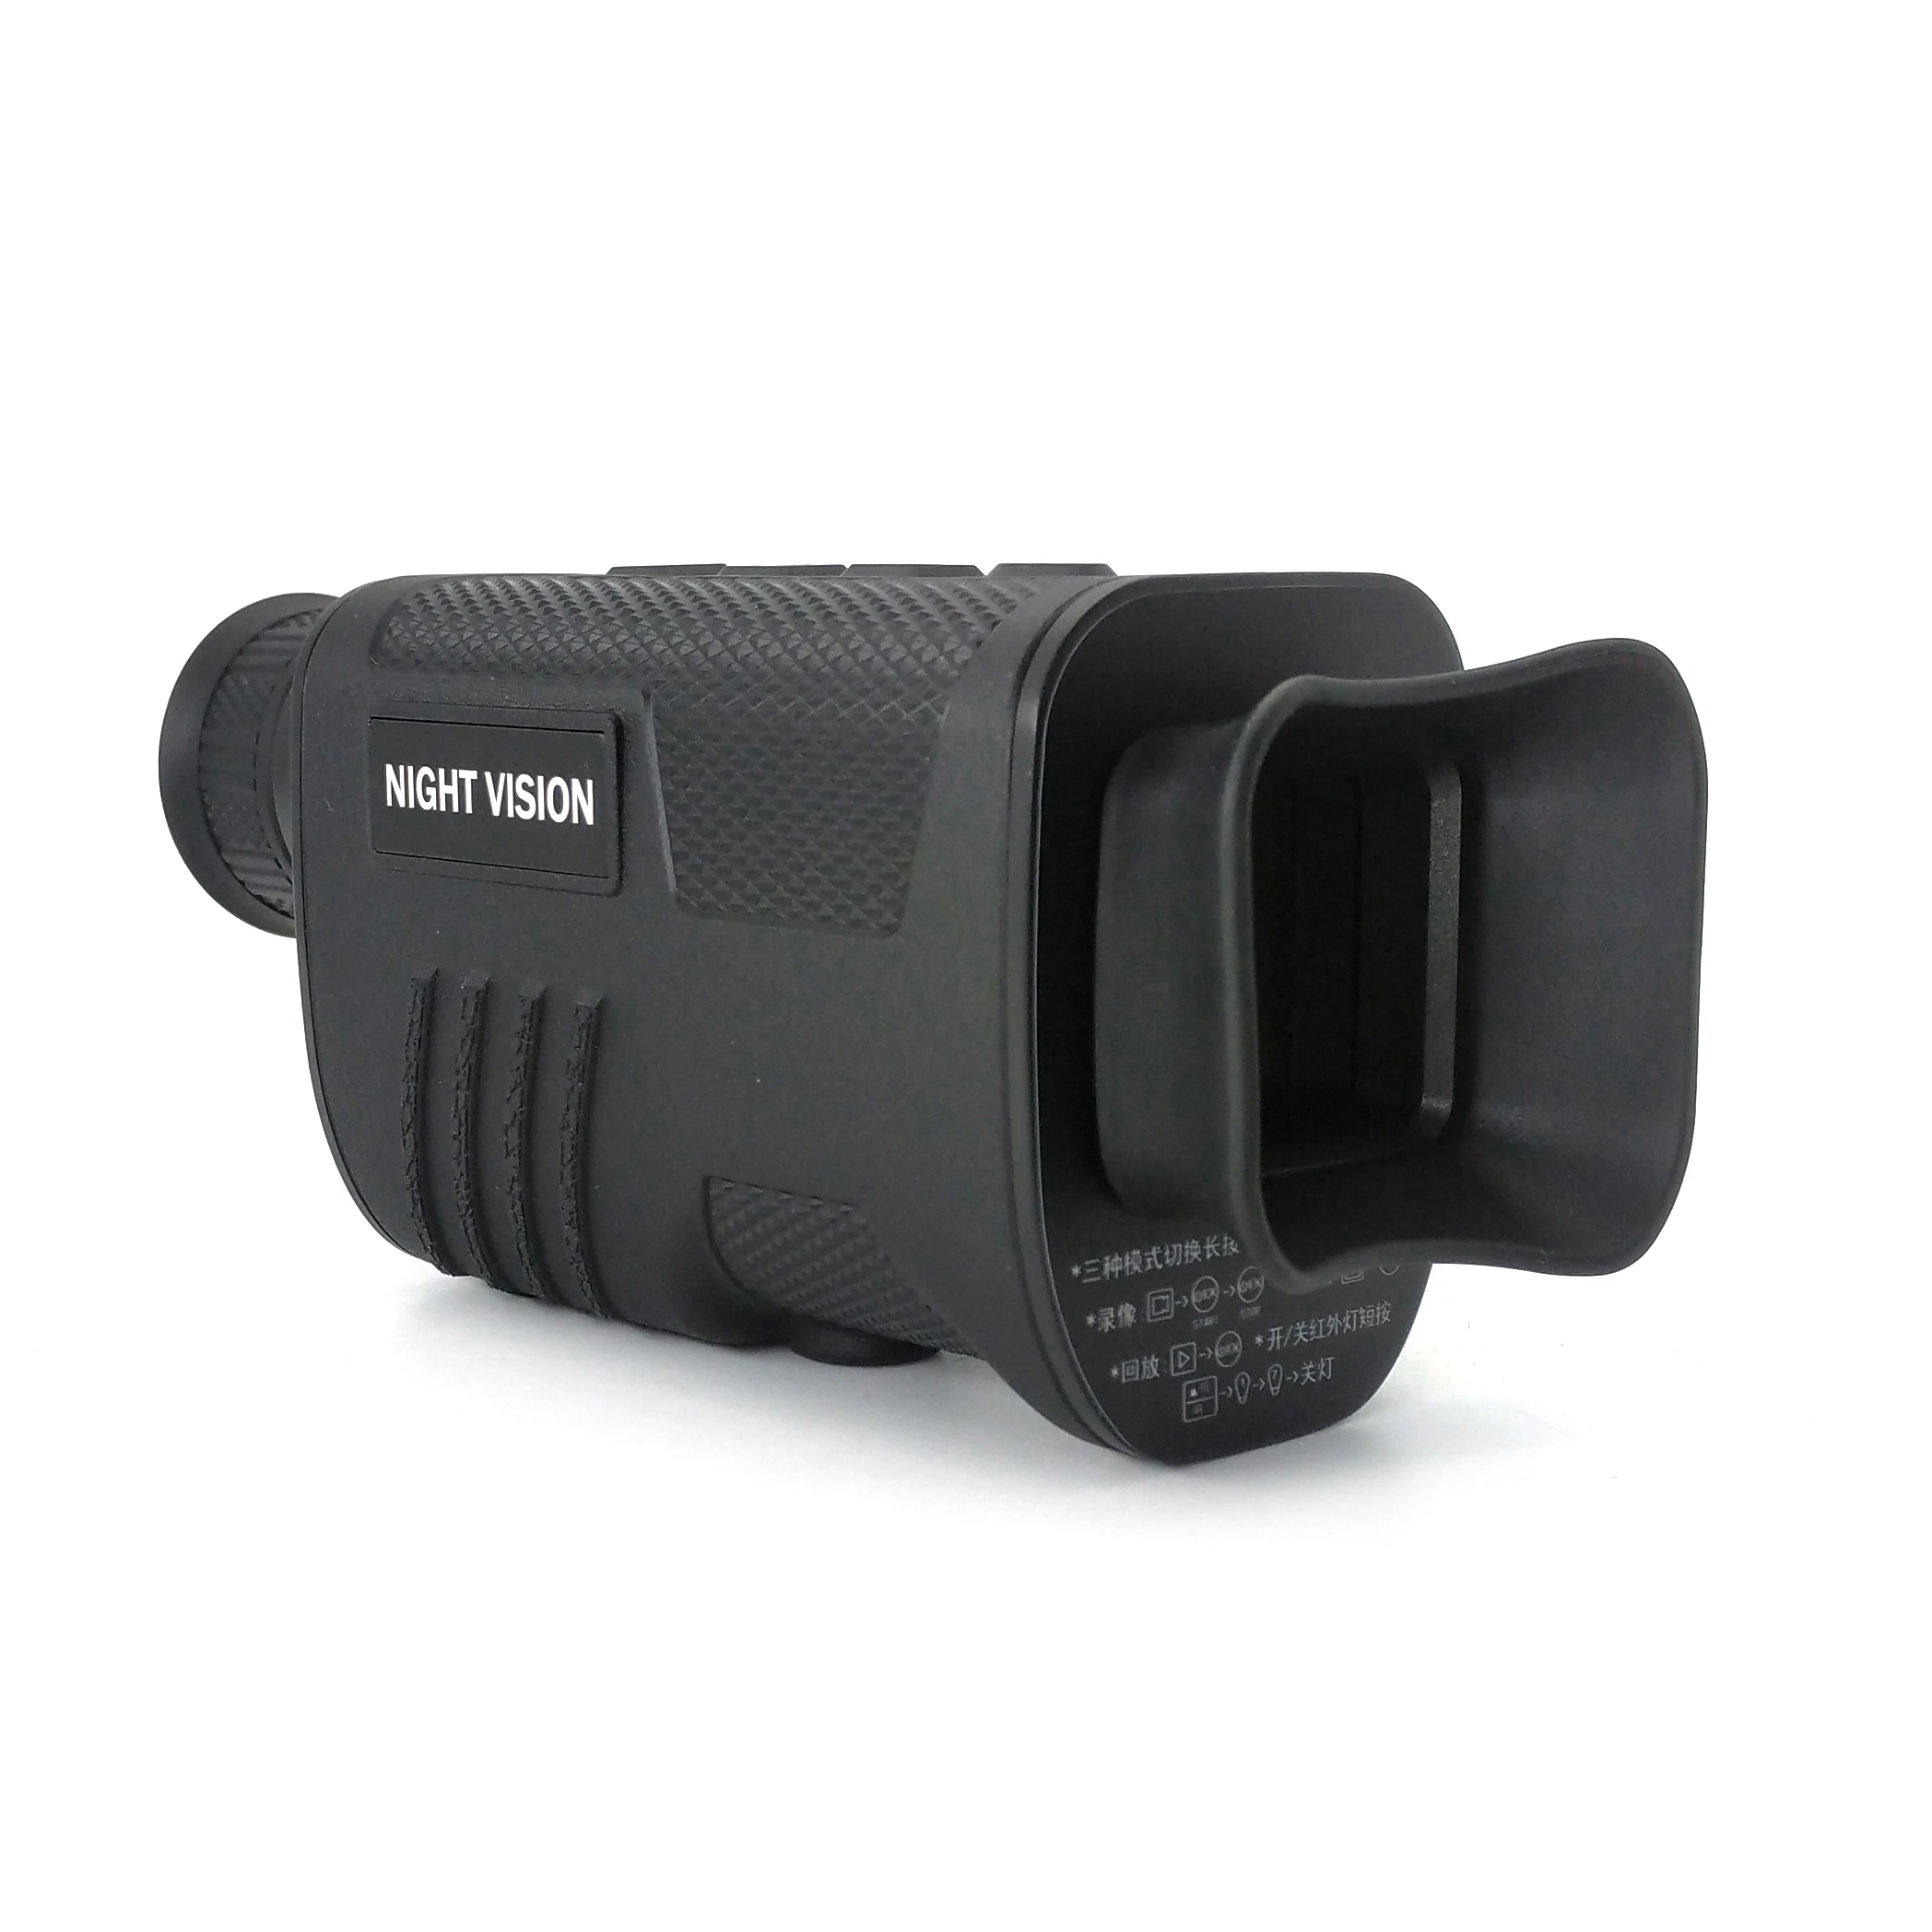 

New Russian Night Vision Infrared Monocular Telescope Day And Night Vision For HD Photo & Video With 128GB Card